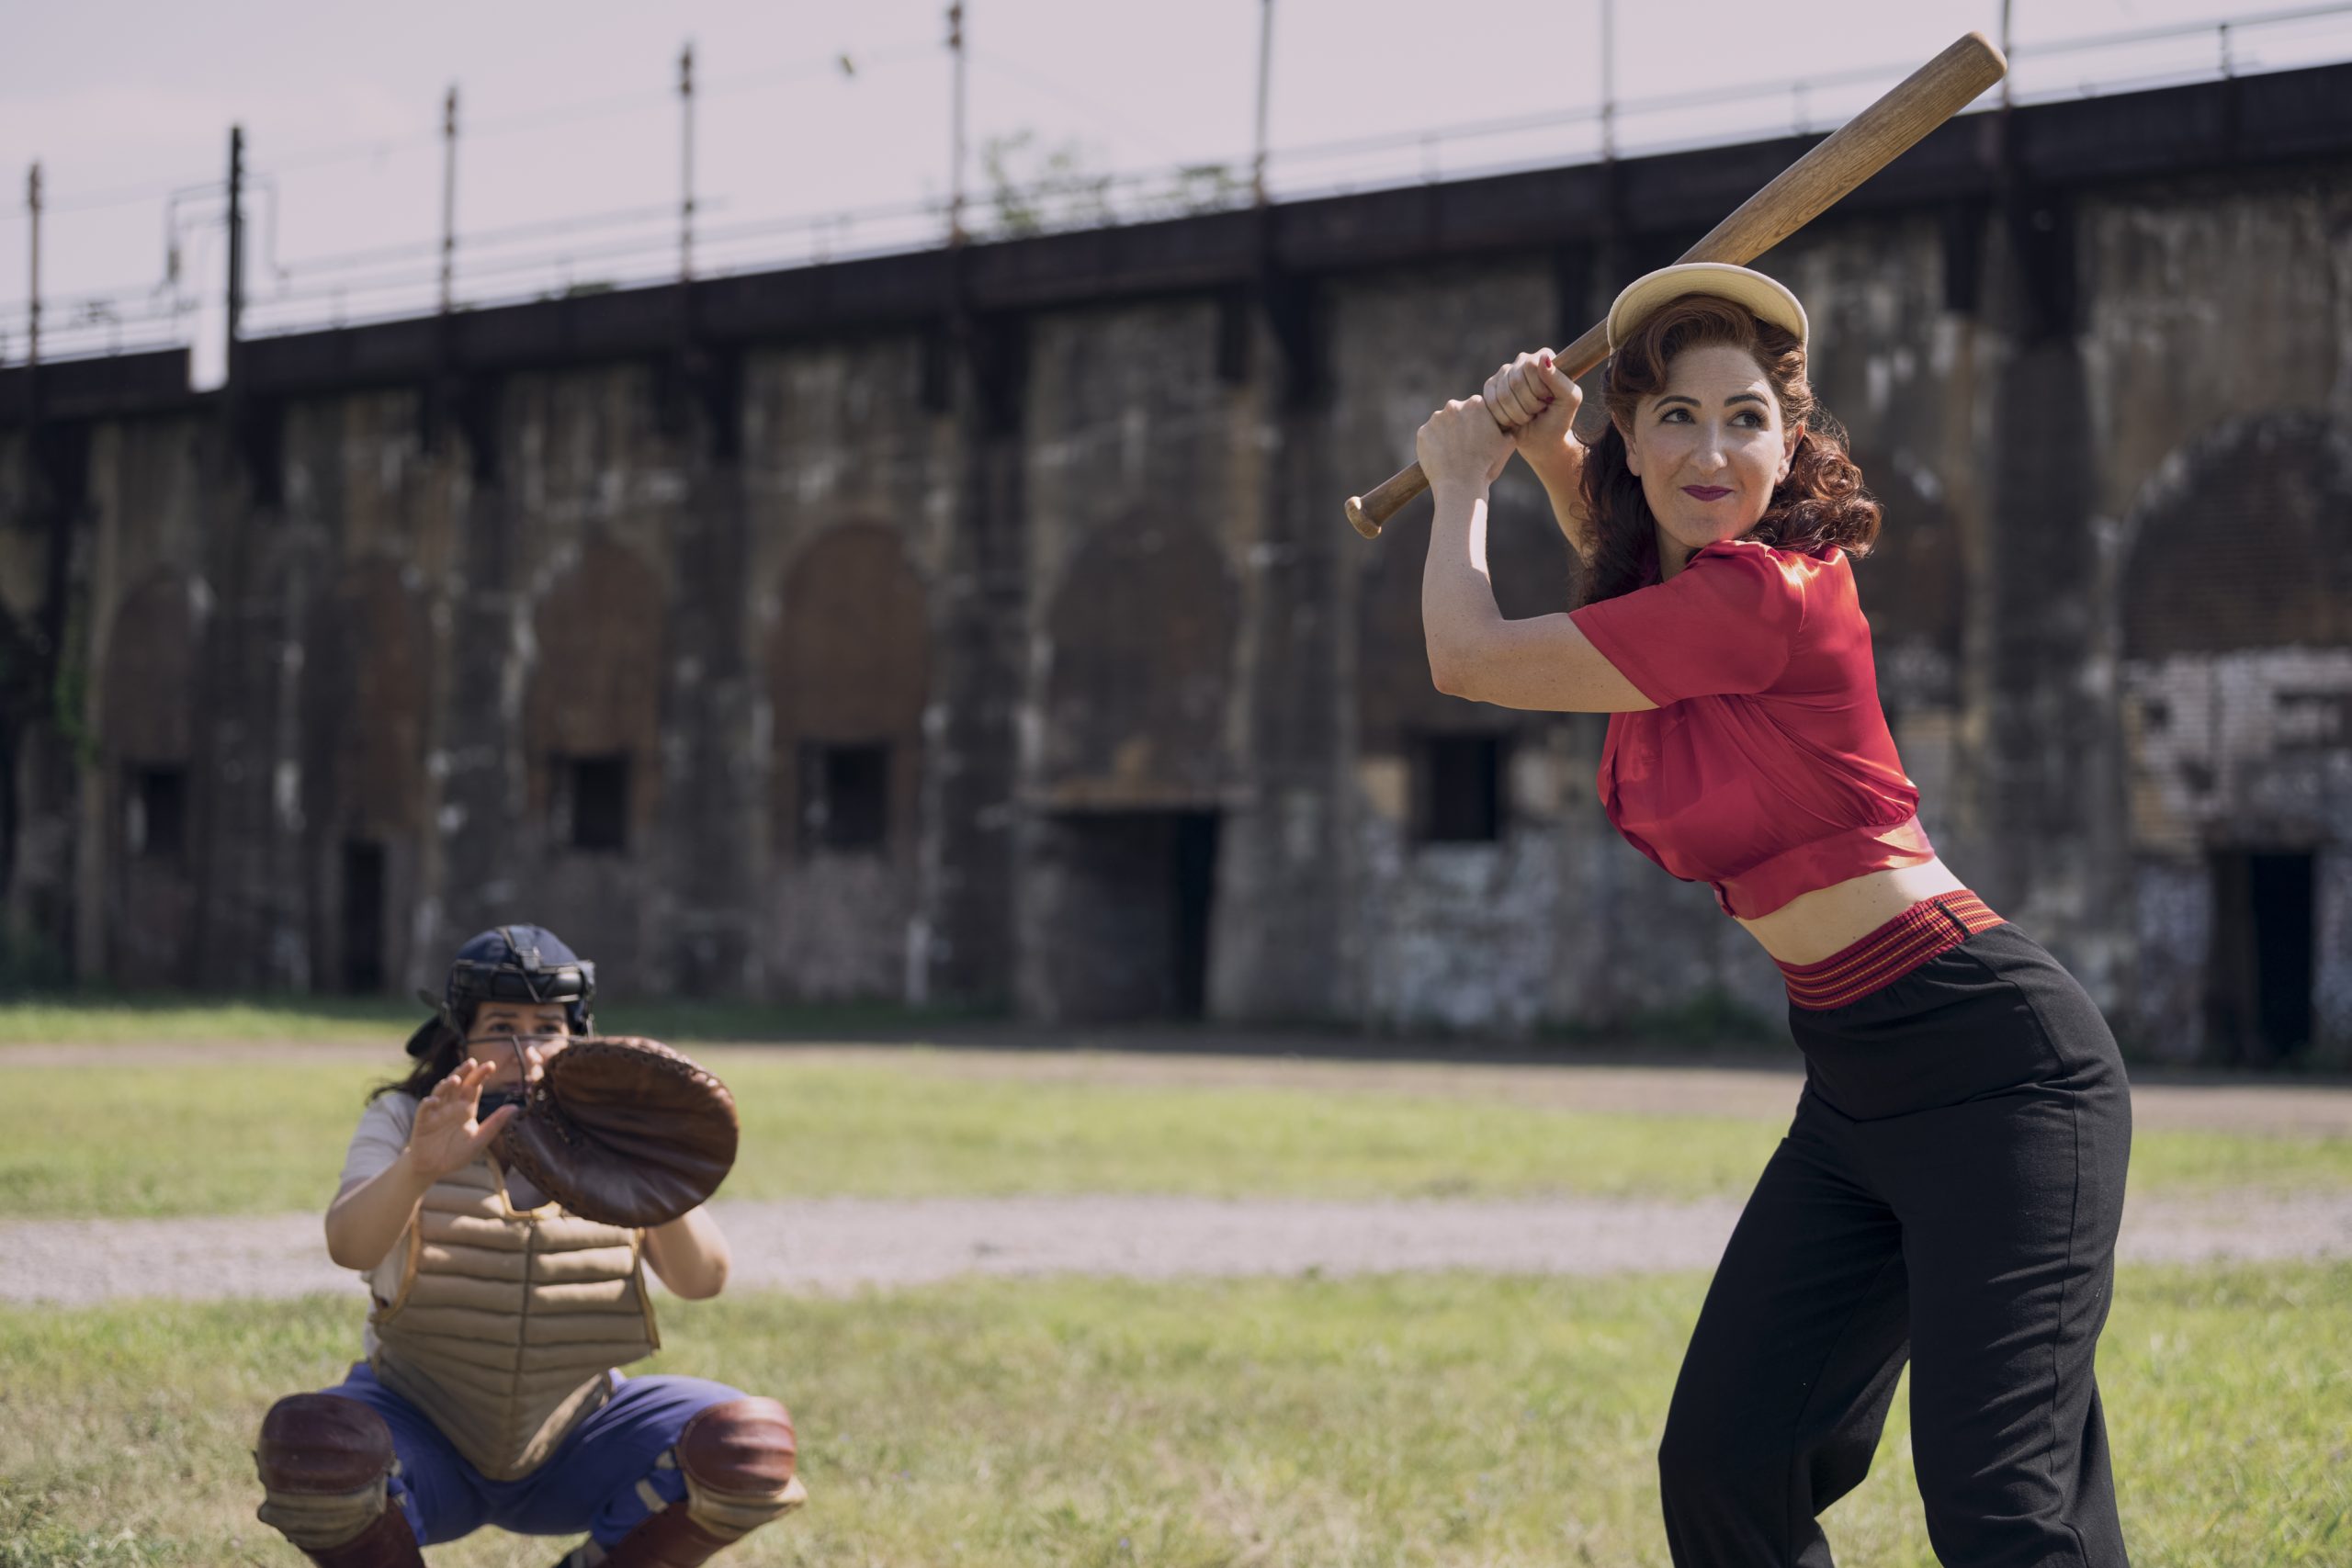 Abbi Jacobson as Carson Shaw and D’Arcy Carden as Greta in A League of Their Own